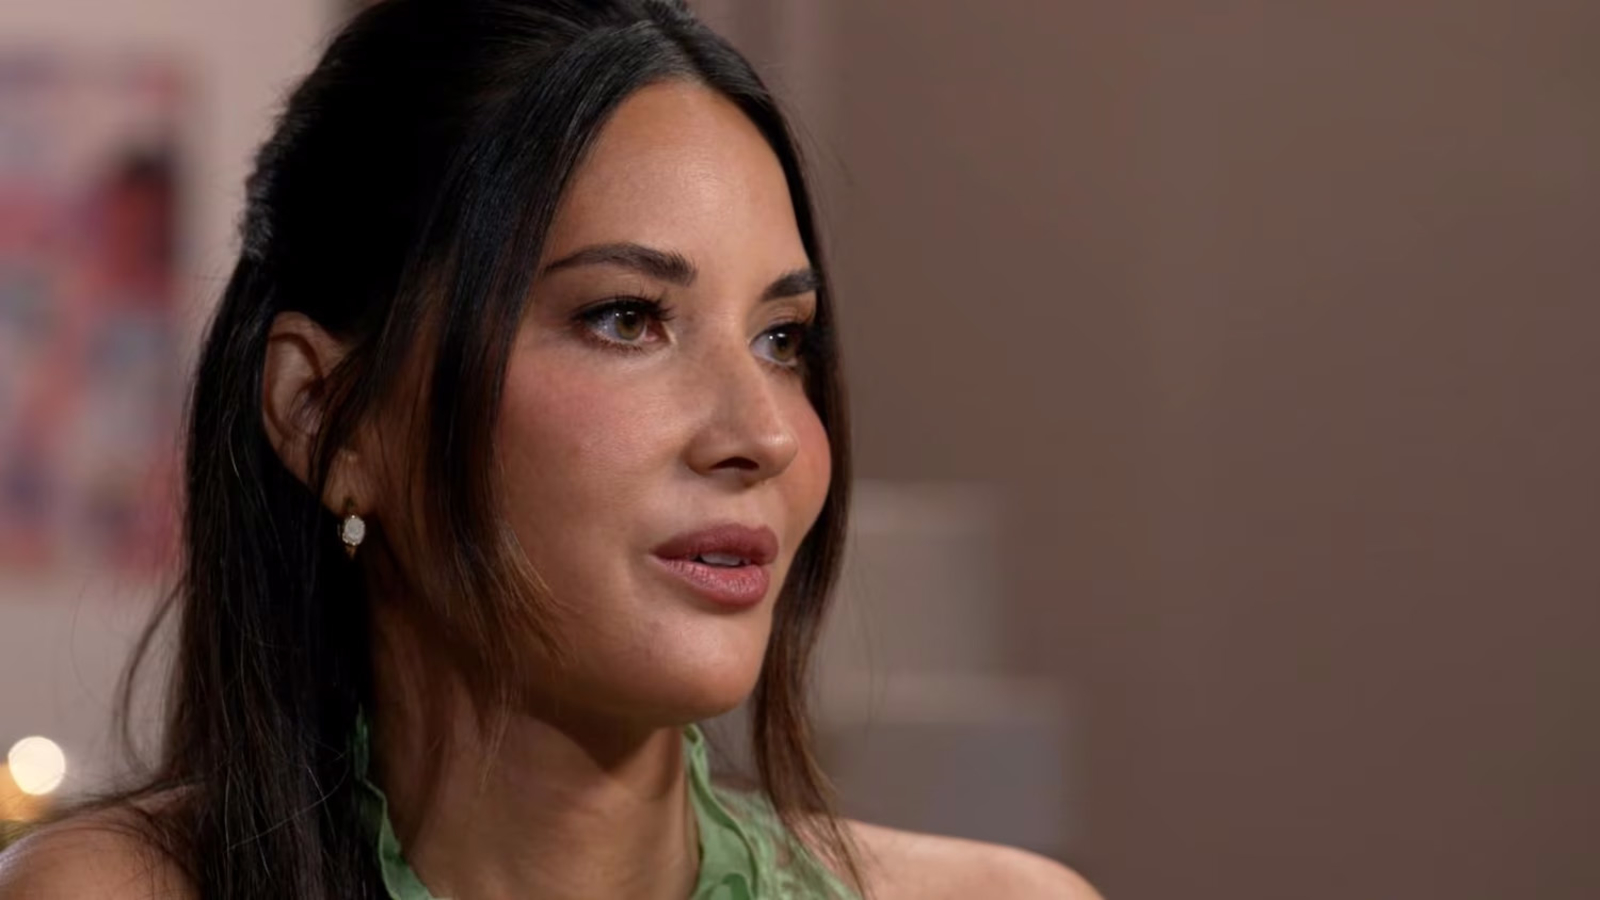 Olivia Munn speaks out about breast cancer, fertility issues in 1st TV interview since surgeries on 